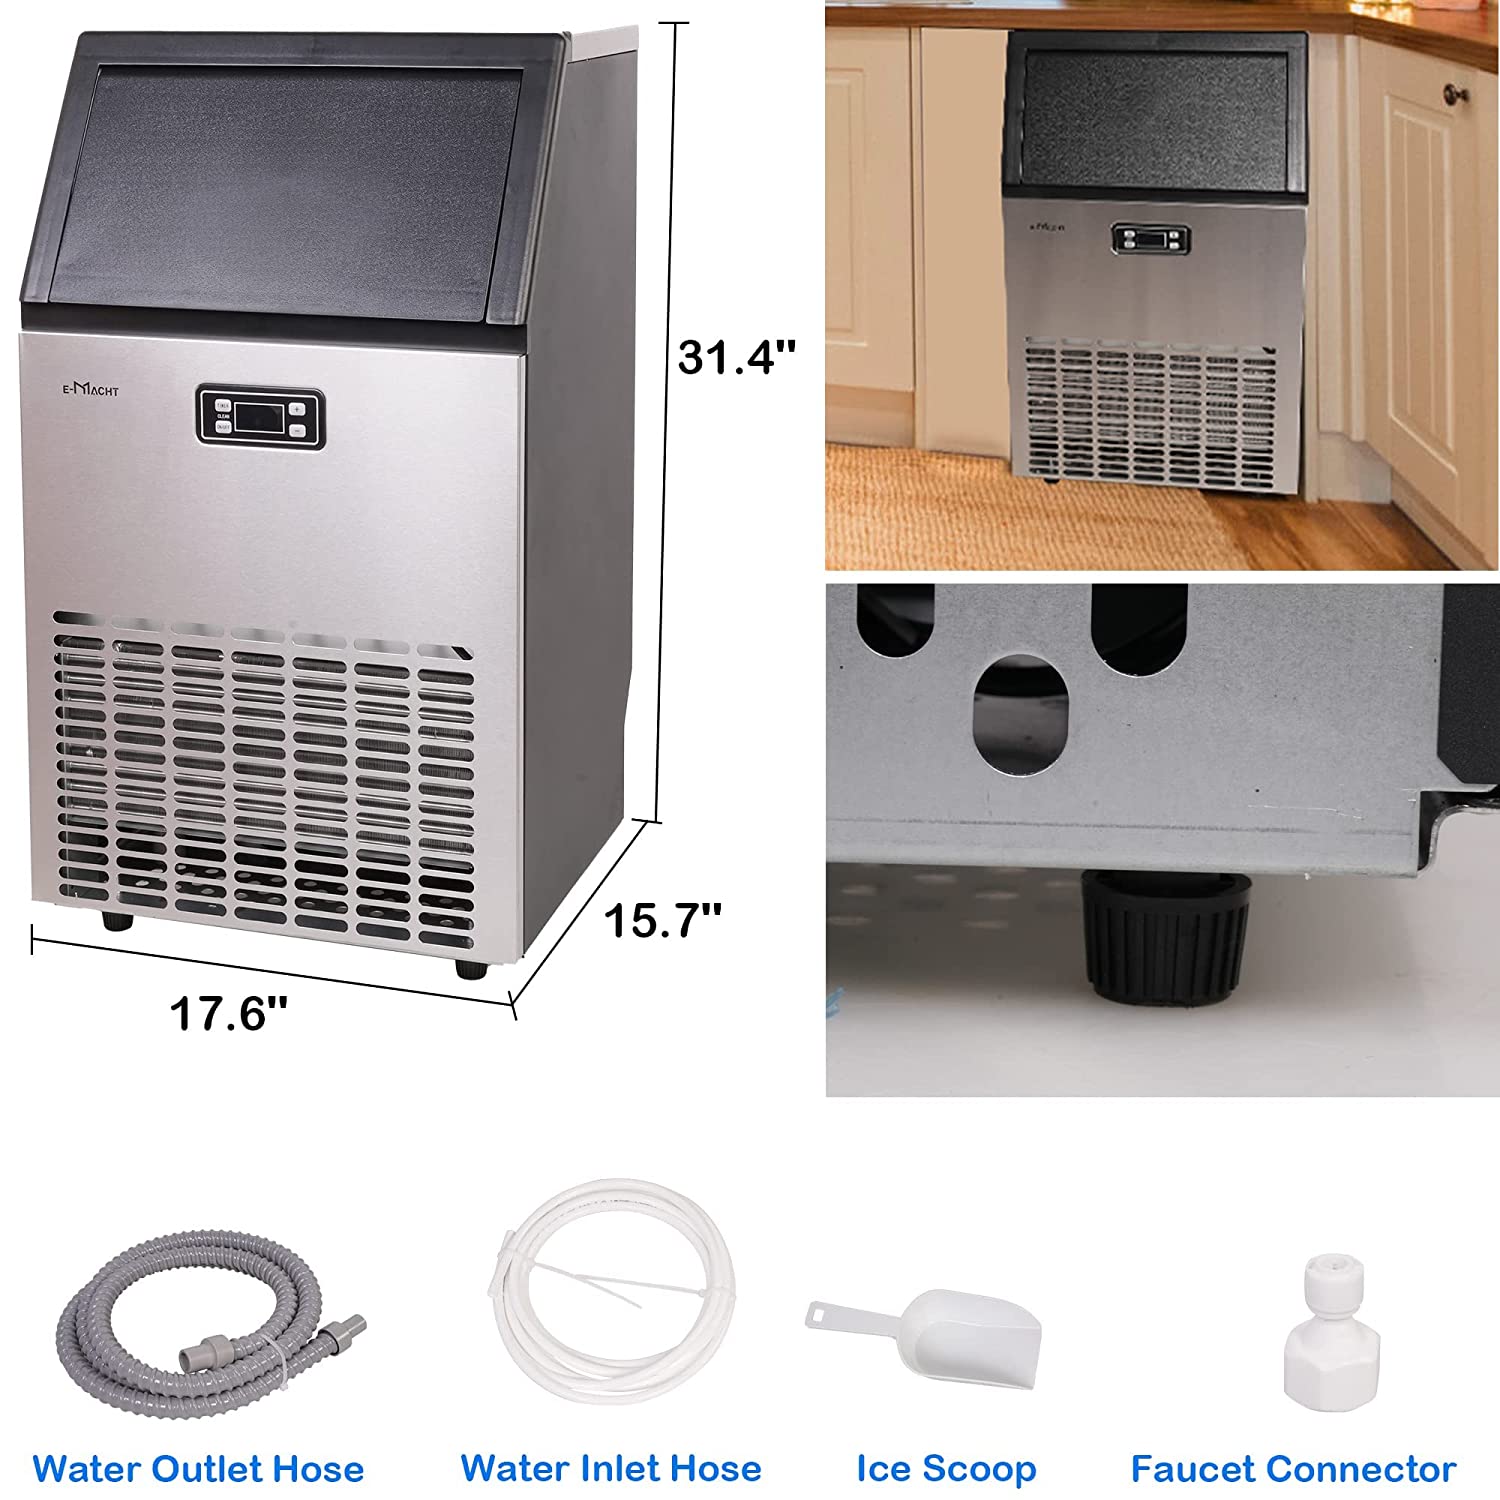 Commercial 100lbs/24H Ice Maker Machine Built-in Stainless Steel Ice Maker Machine with a smart LCD panel